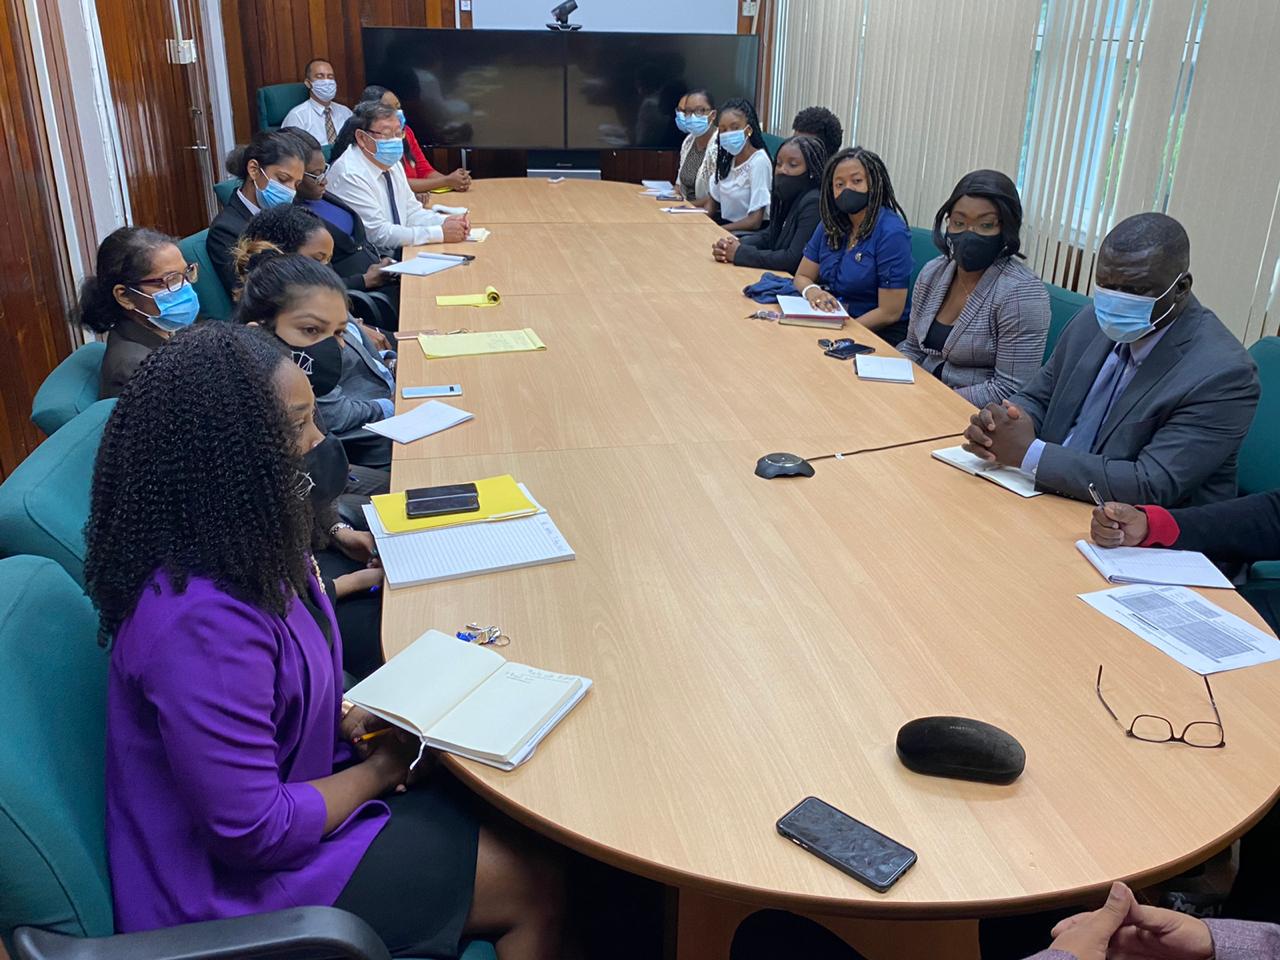 https://guyanatimesgy.com/wp-content/uploads/2020/08/Attorney-General-and-Minister-of-Legal-Affairs-meeting-staff-members-of-the-Ministry-of-Legal-Affairs-7.jpeg